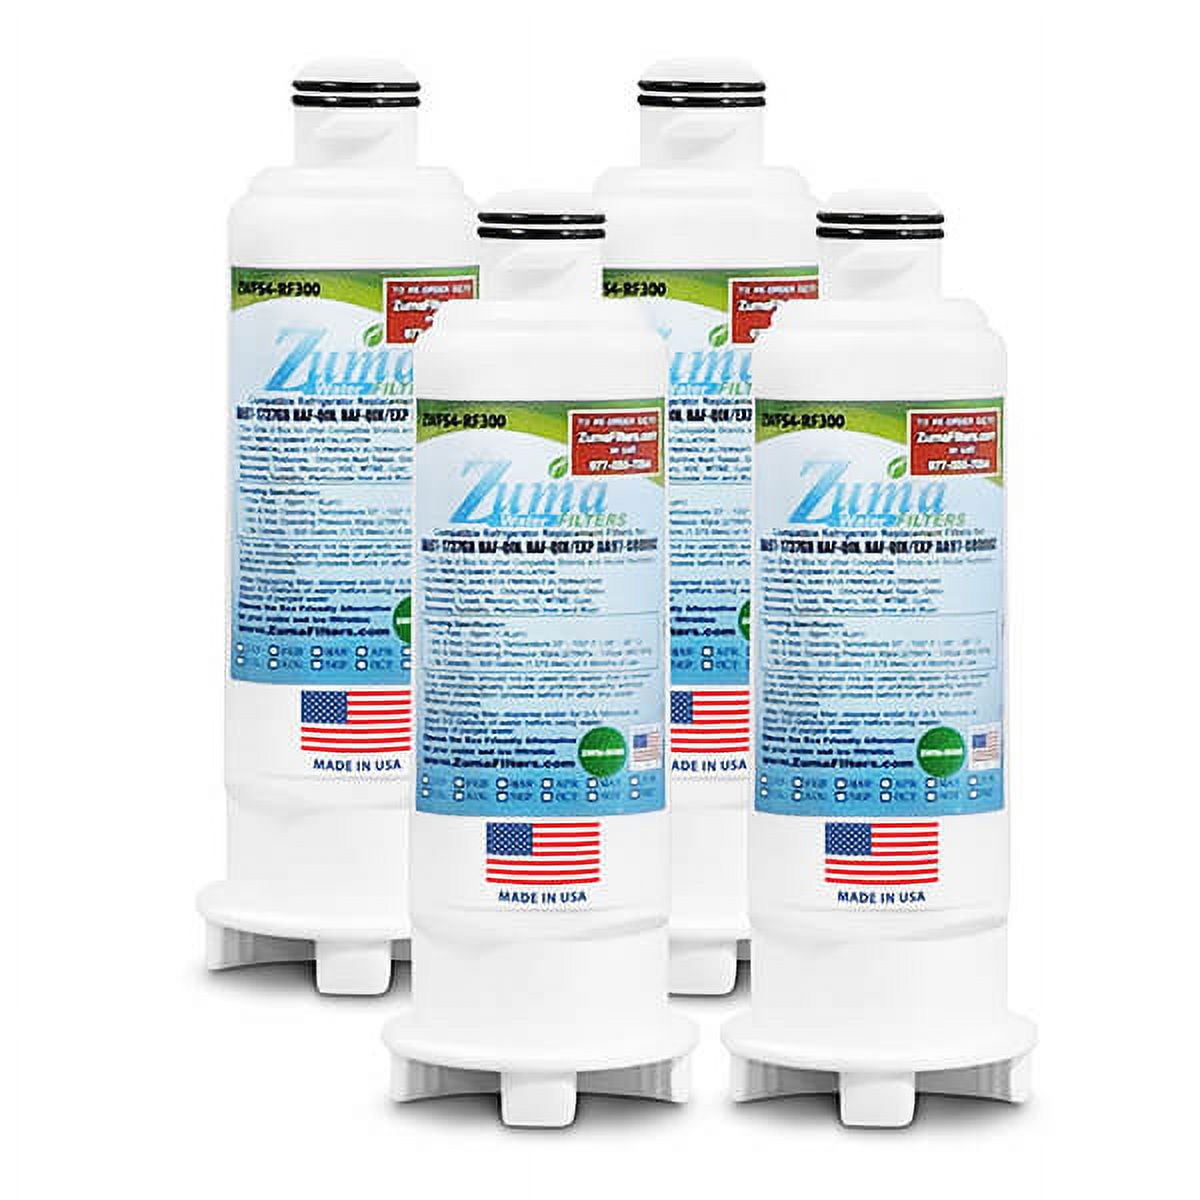 ZUMA Brand , Refrigerator Water Filter , Model # ZWFS4-RF300 , Compatible with HAF-QIN HAF-QIN/EXP DA97-17376B - 4 Pack - Made in U.S.A. - image 1 of 2